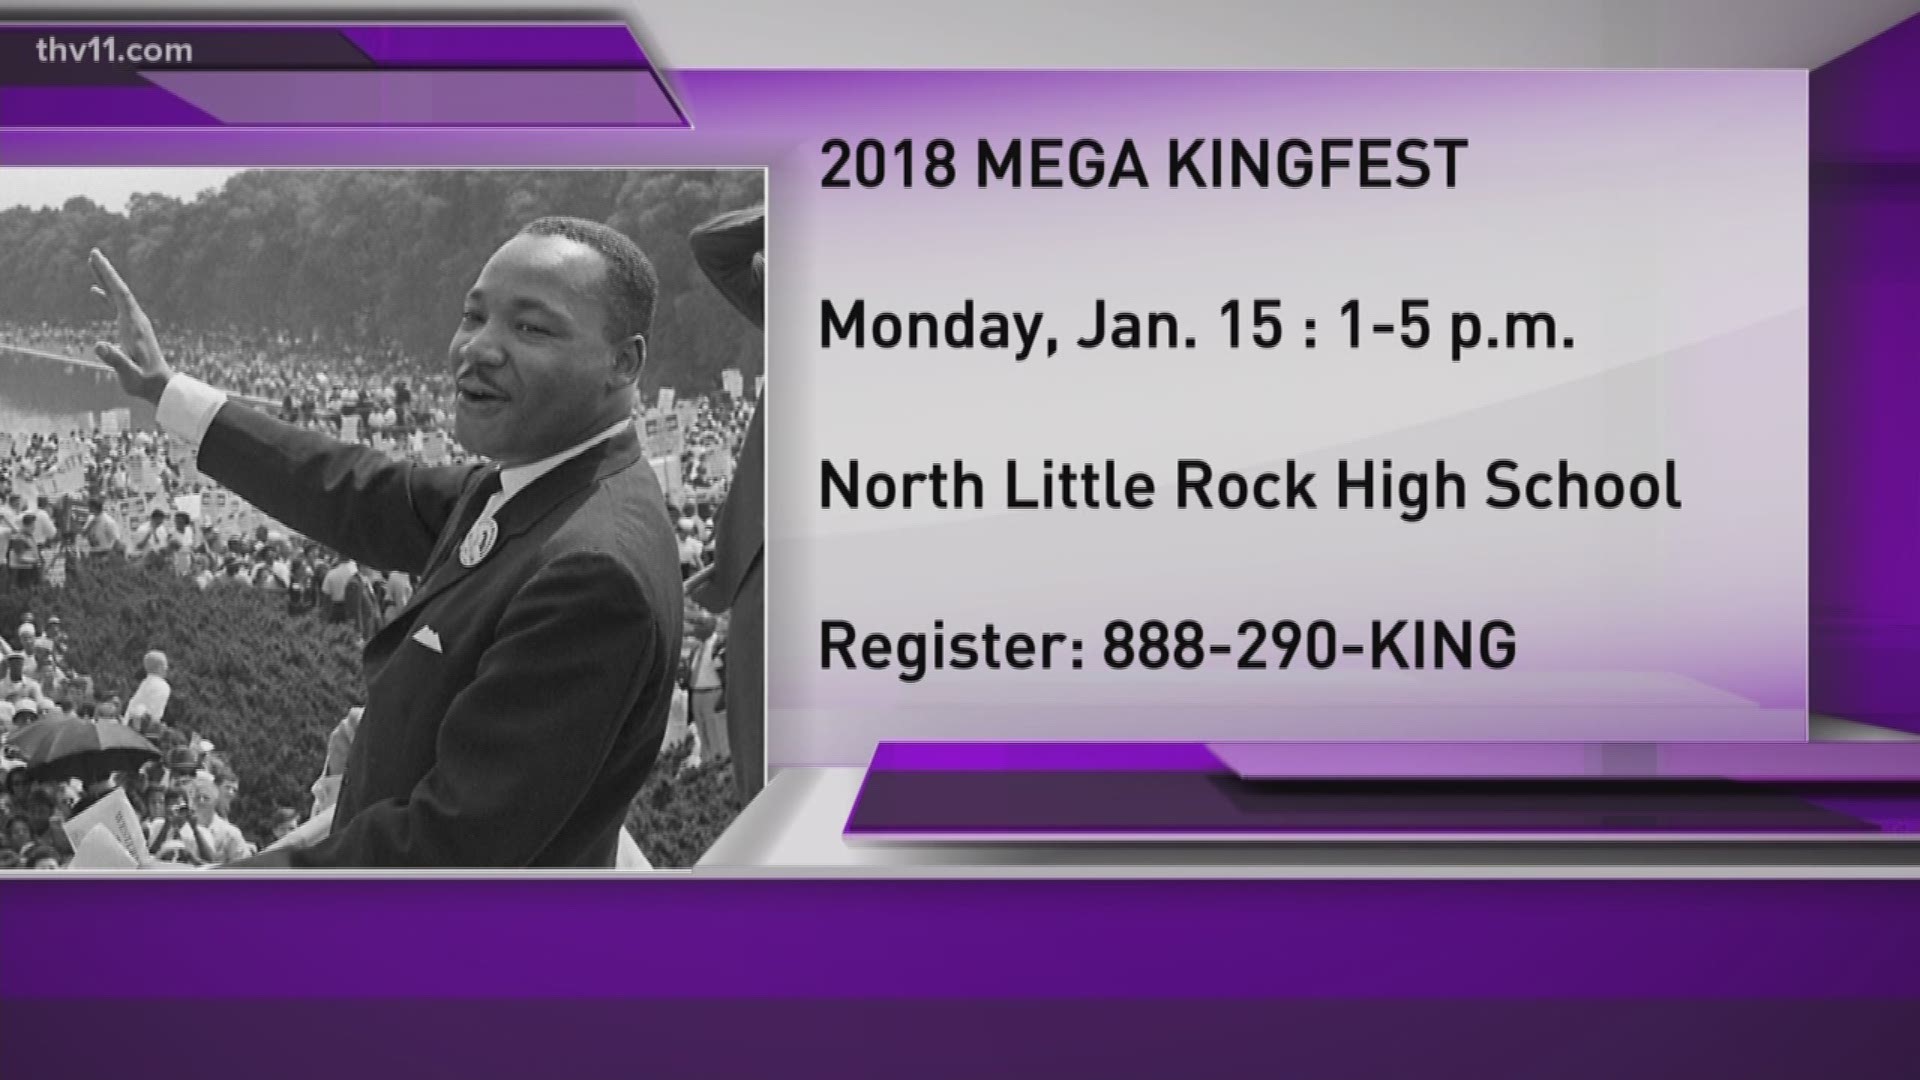 One of the biggest things to come out of last year's general assembly was the separation of Martin Luther King Jr and Robert E. Lee day, and a lot is being planned for the inaugural celebration.